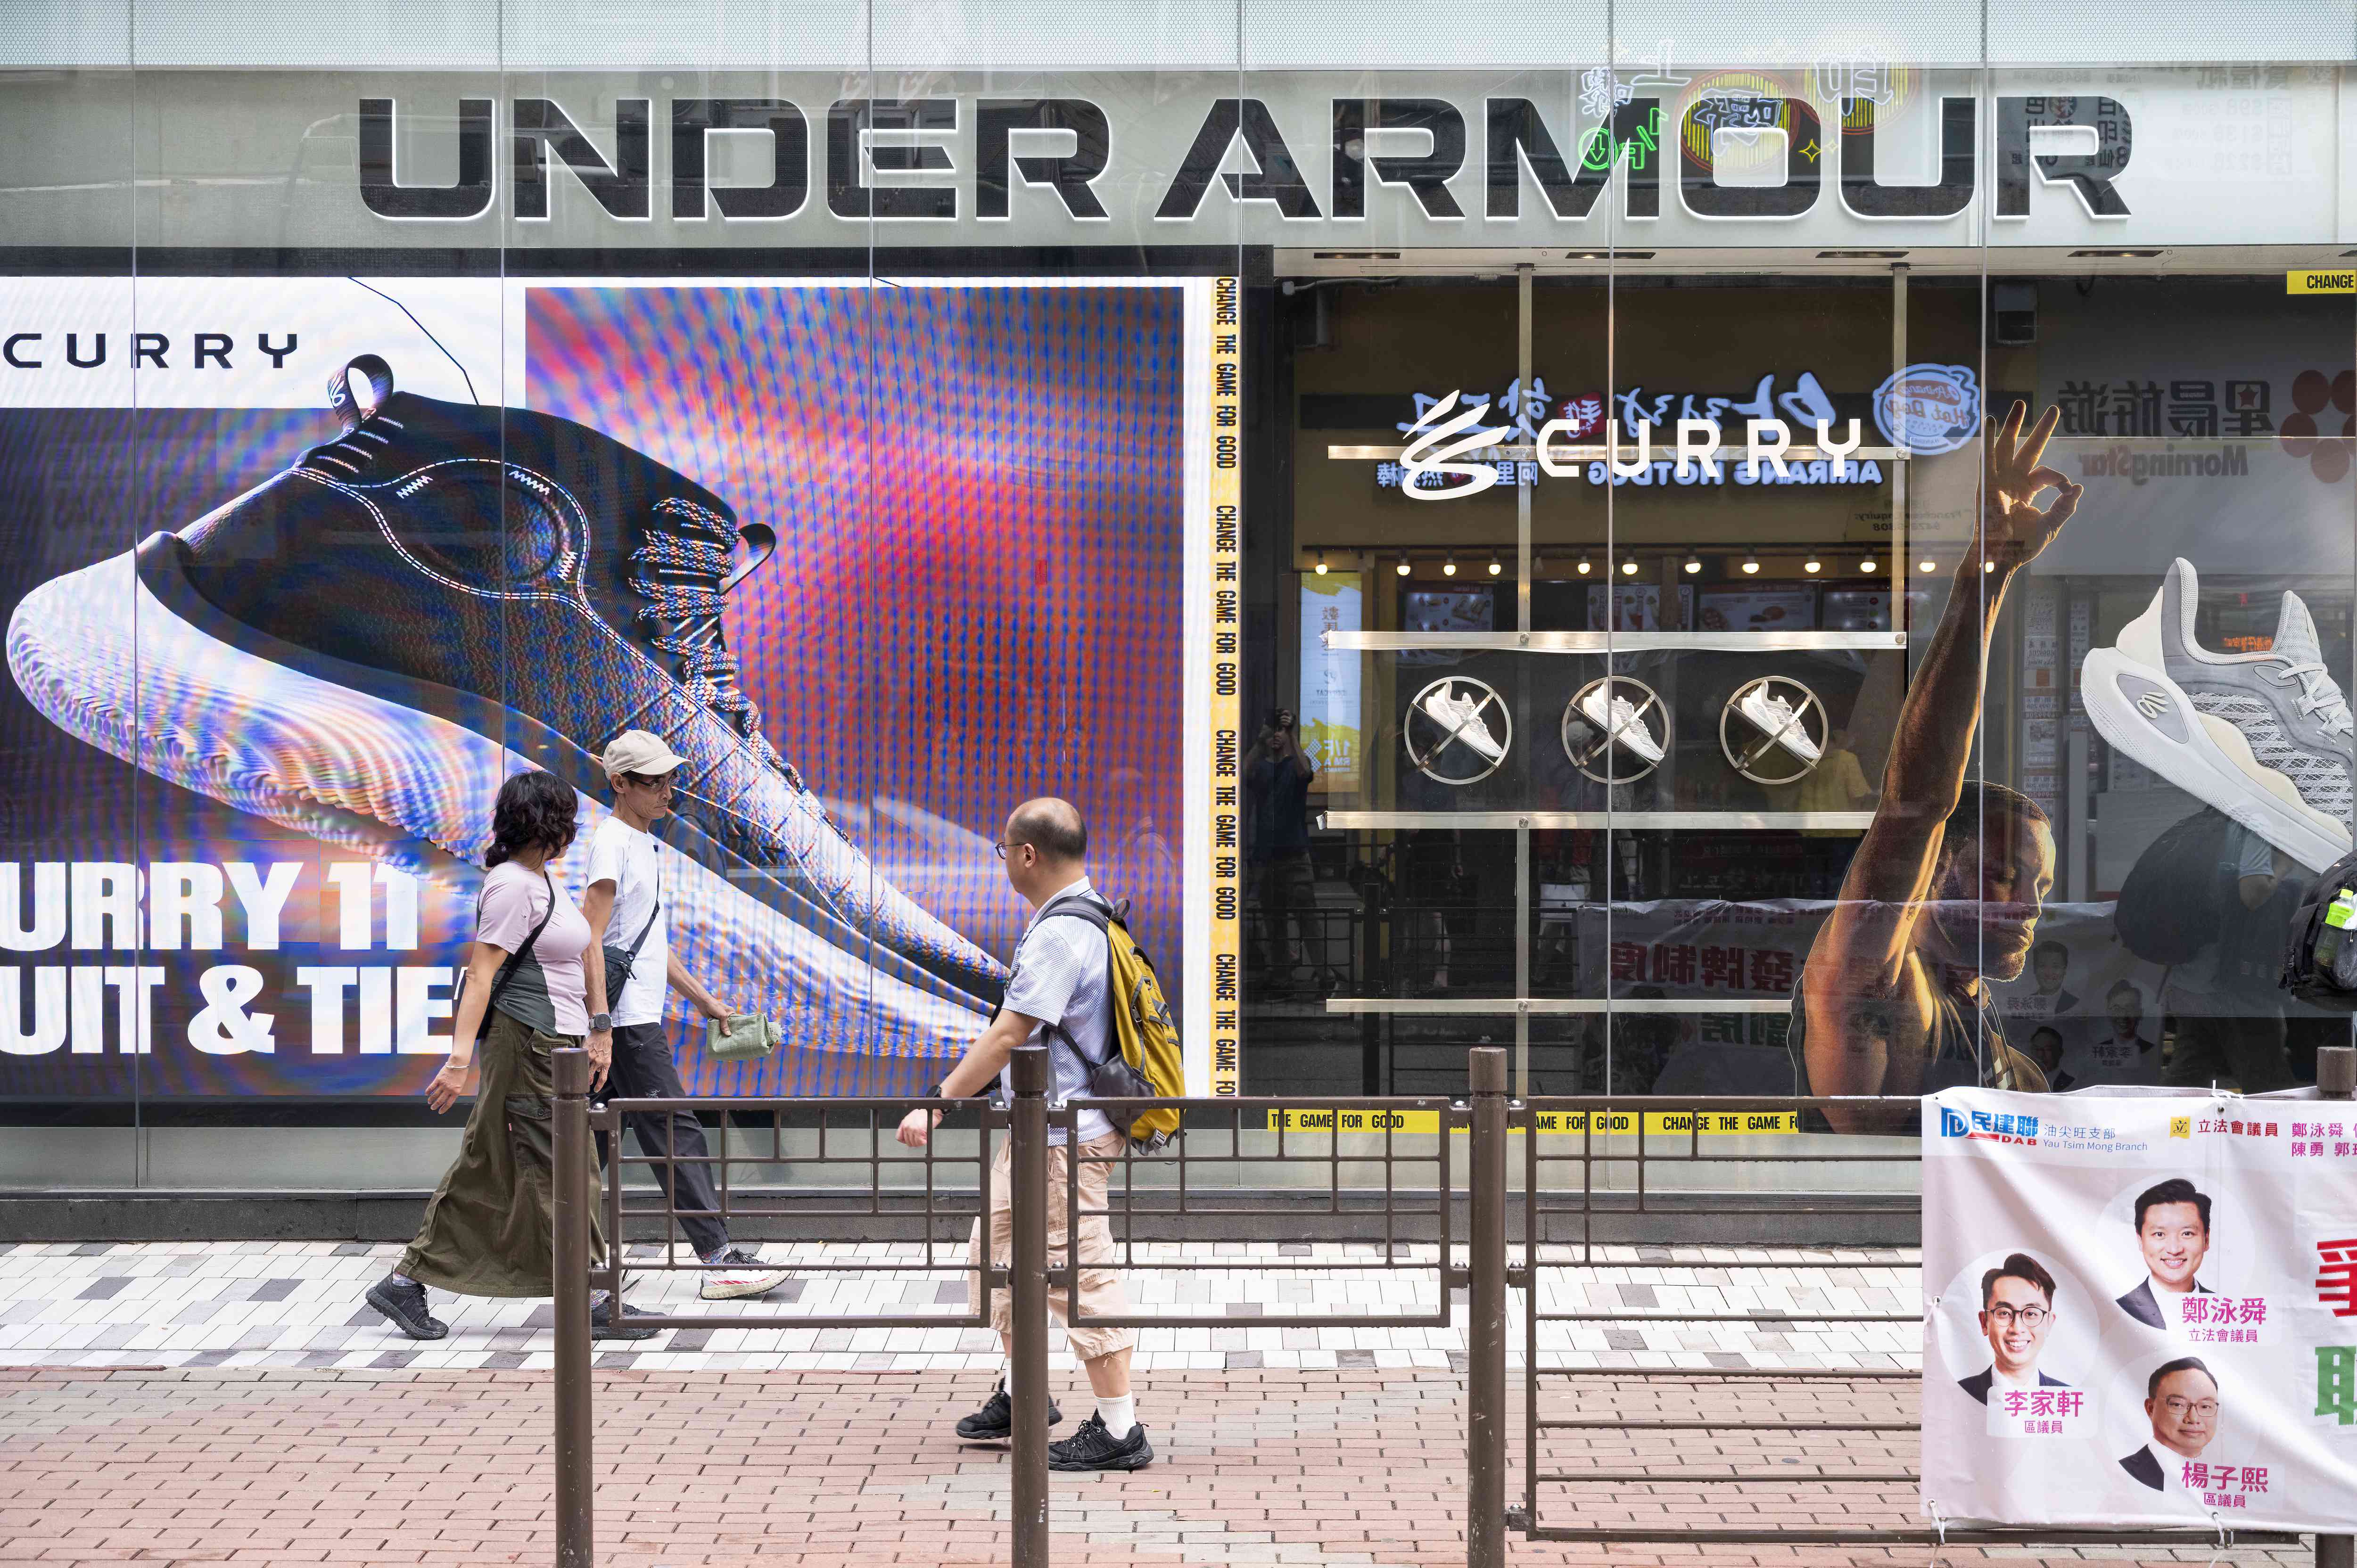 Pedestrians walk past the American multinational clothing brand Under Armour store in Hong Kong